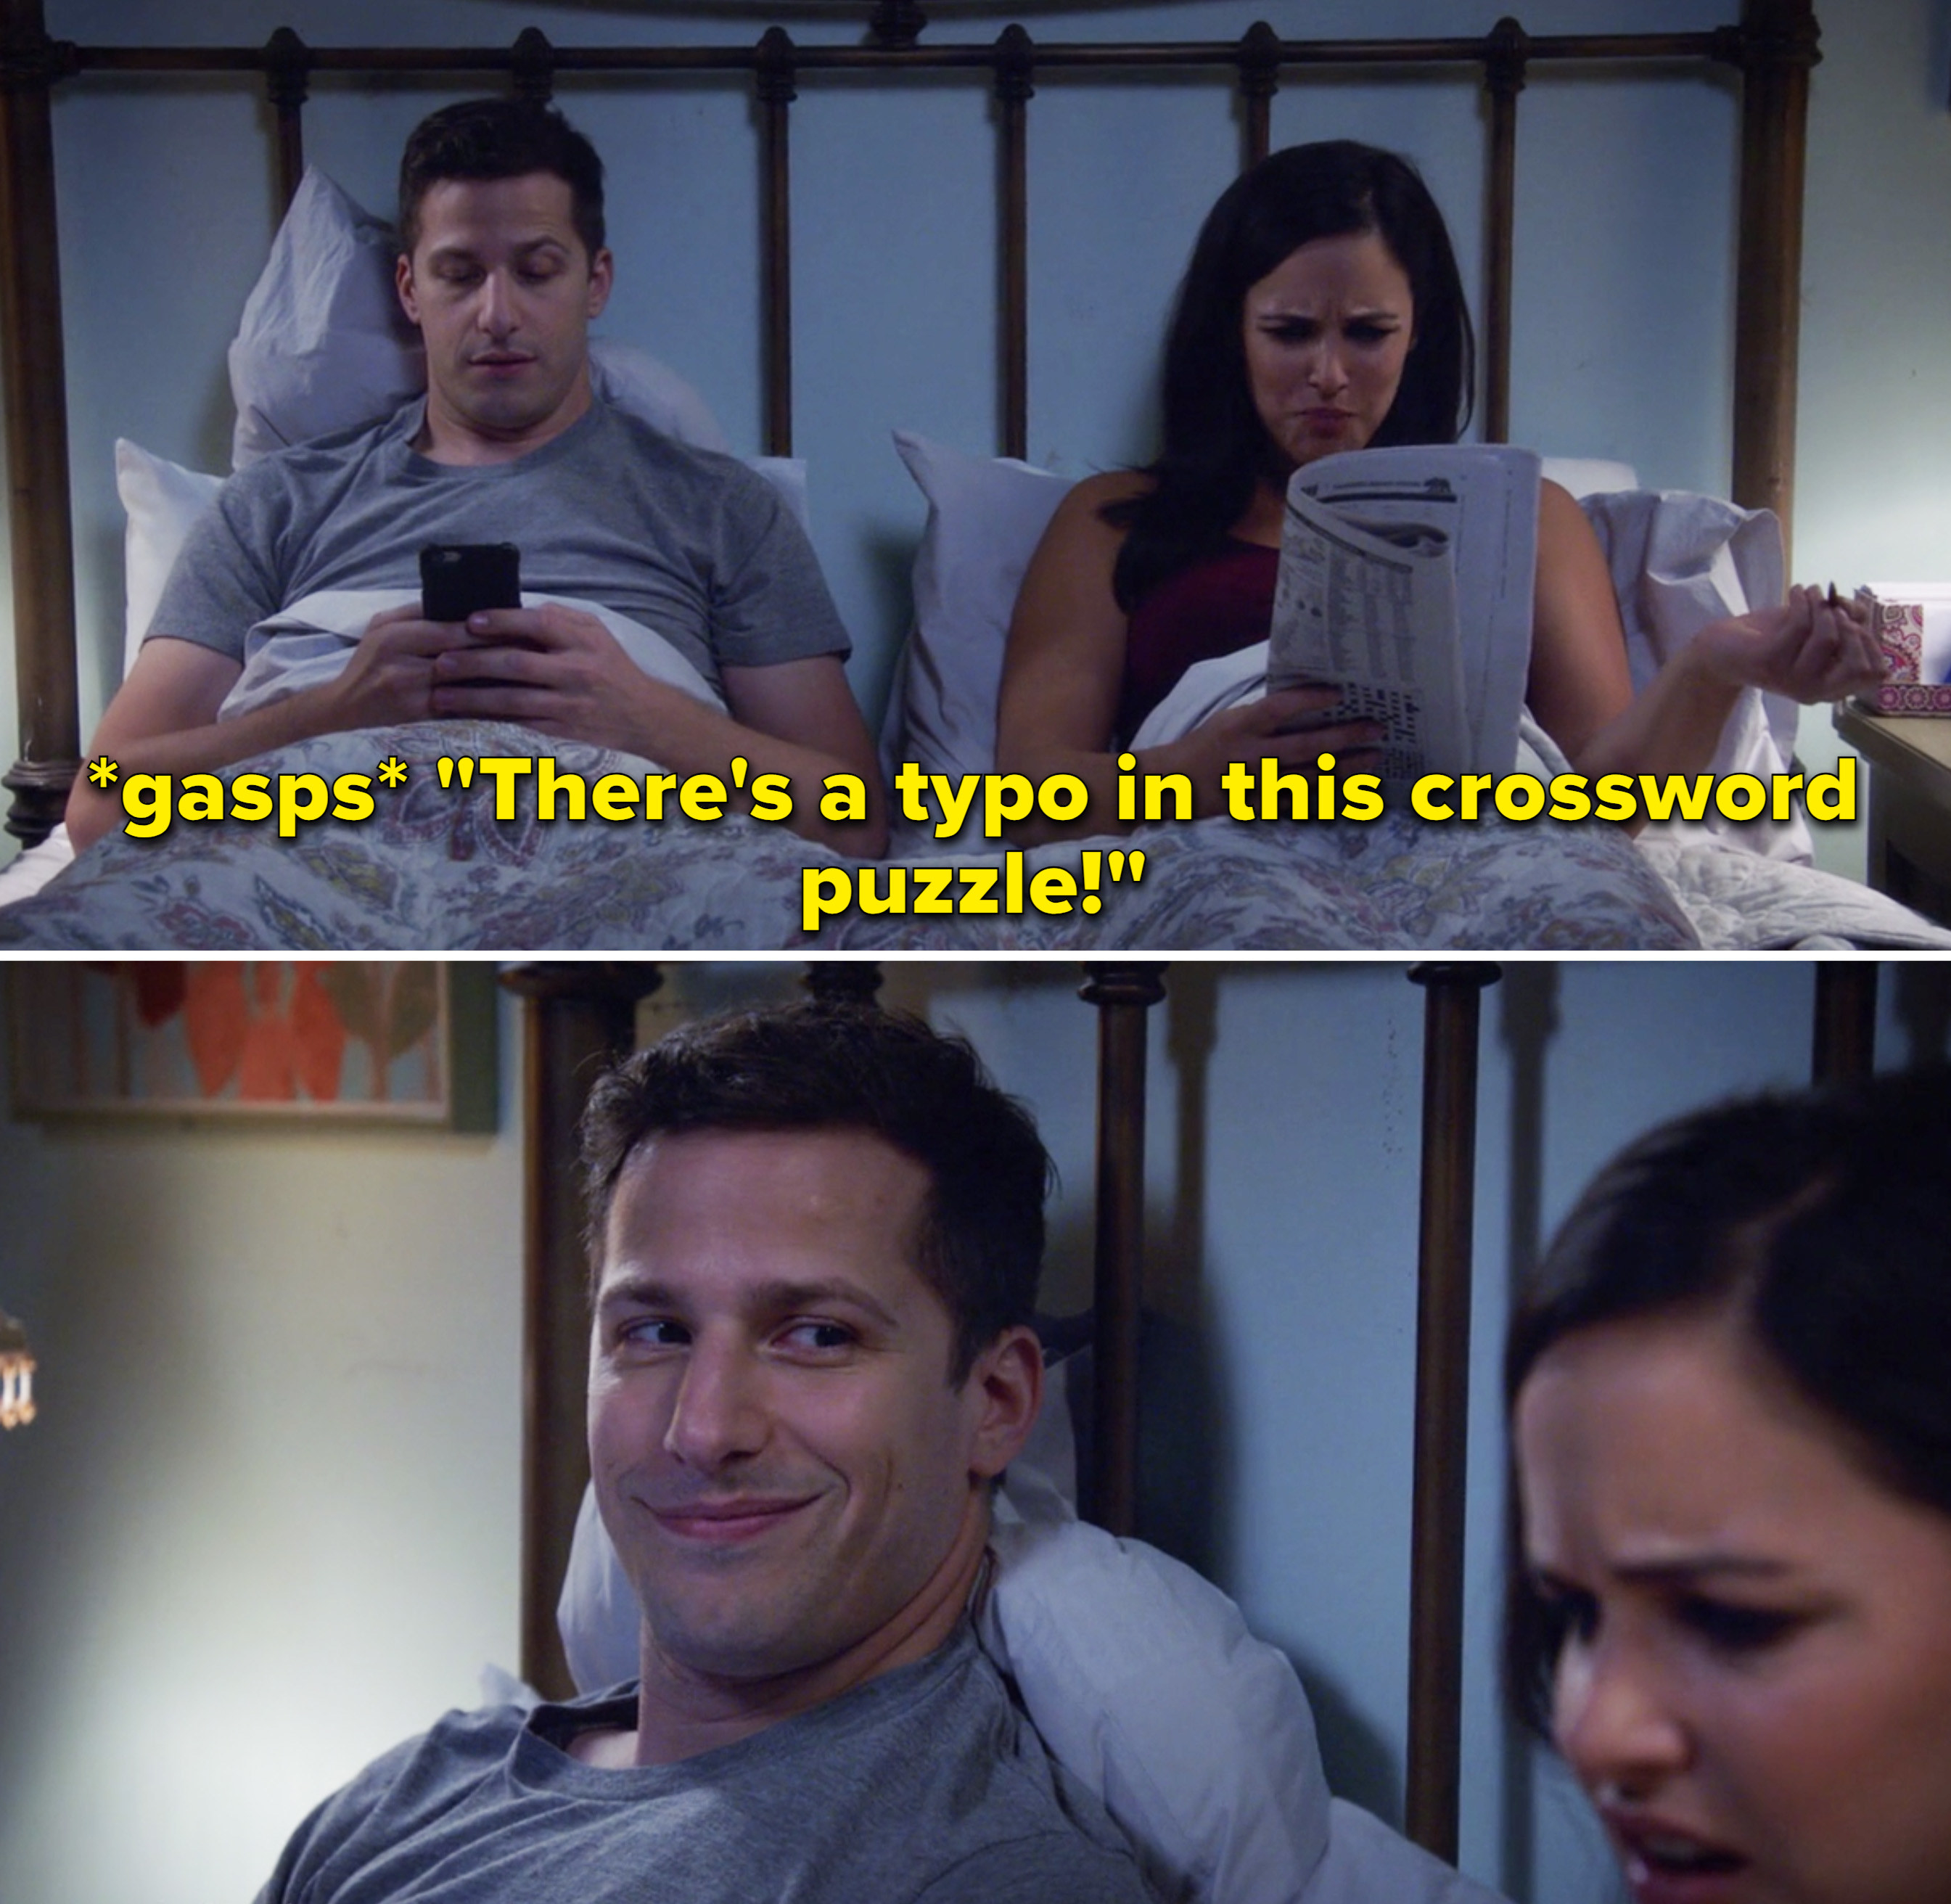 Amy gasping and saying, &quot;There&#x27;s a typo in this crossword puzzle!&quot; And Jake smiling at her